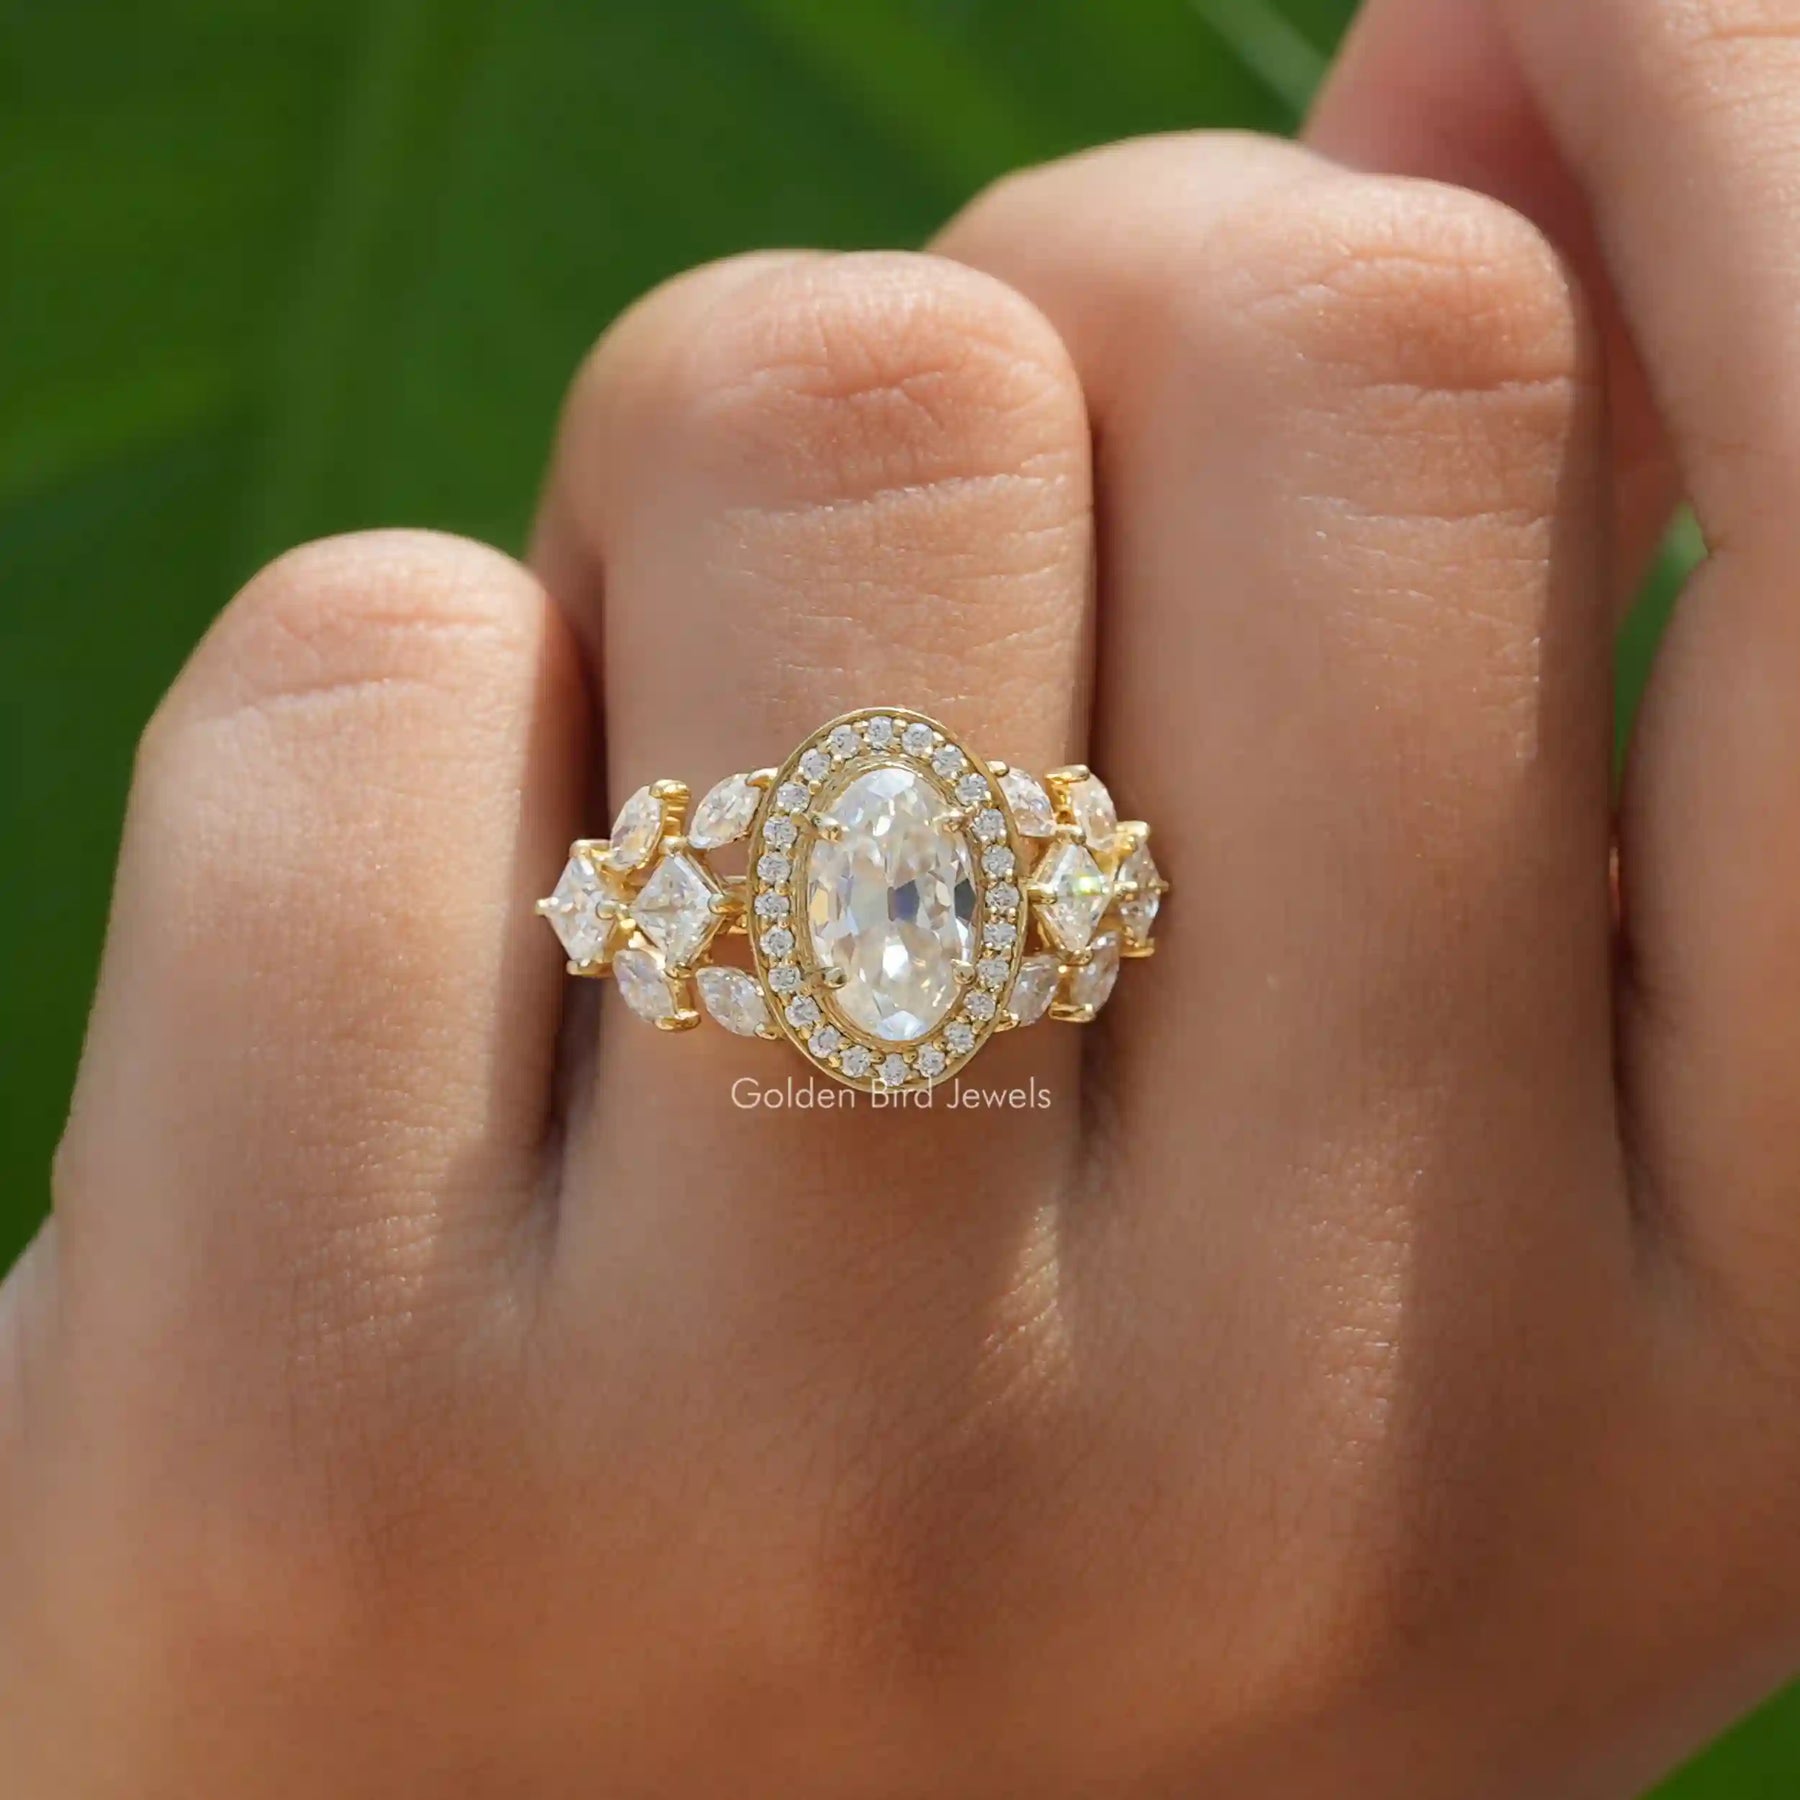 [This halo style moissanite engagement ring set in moval cut stone and side round cut stones]